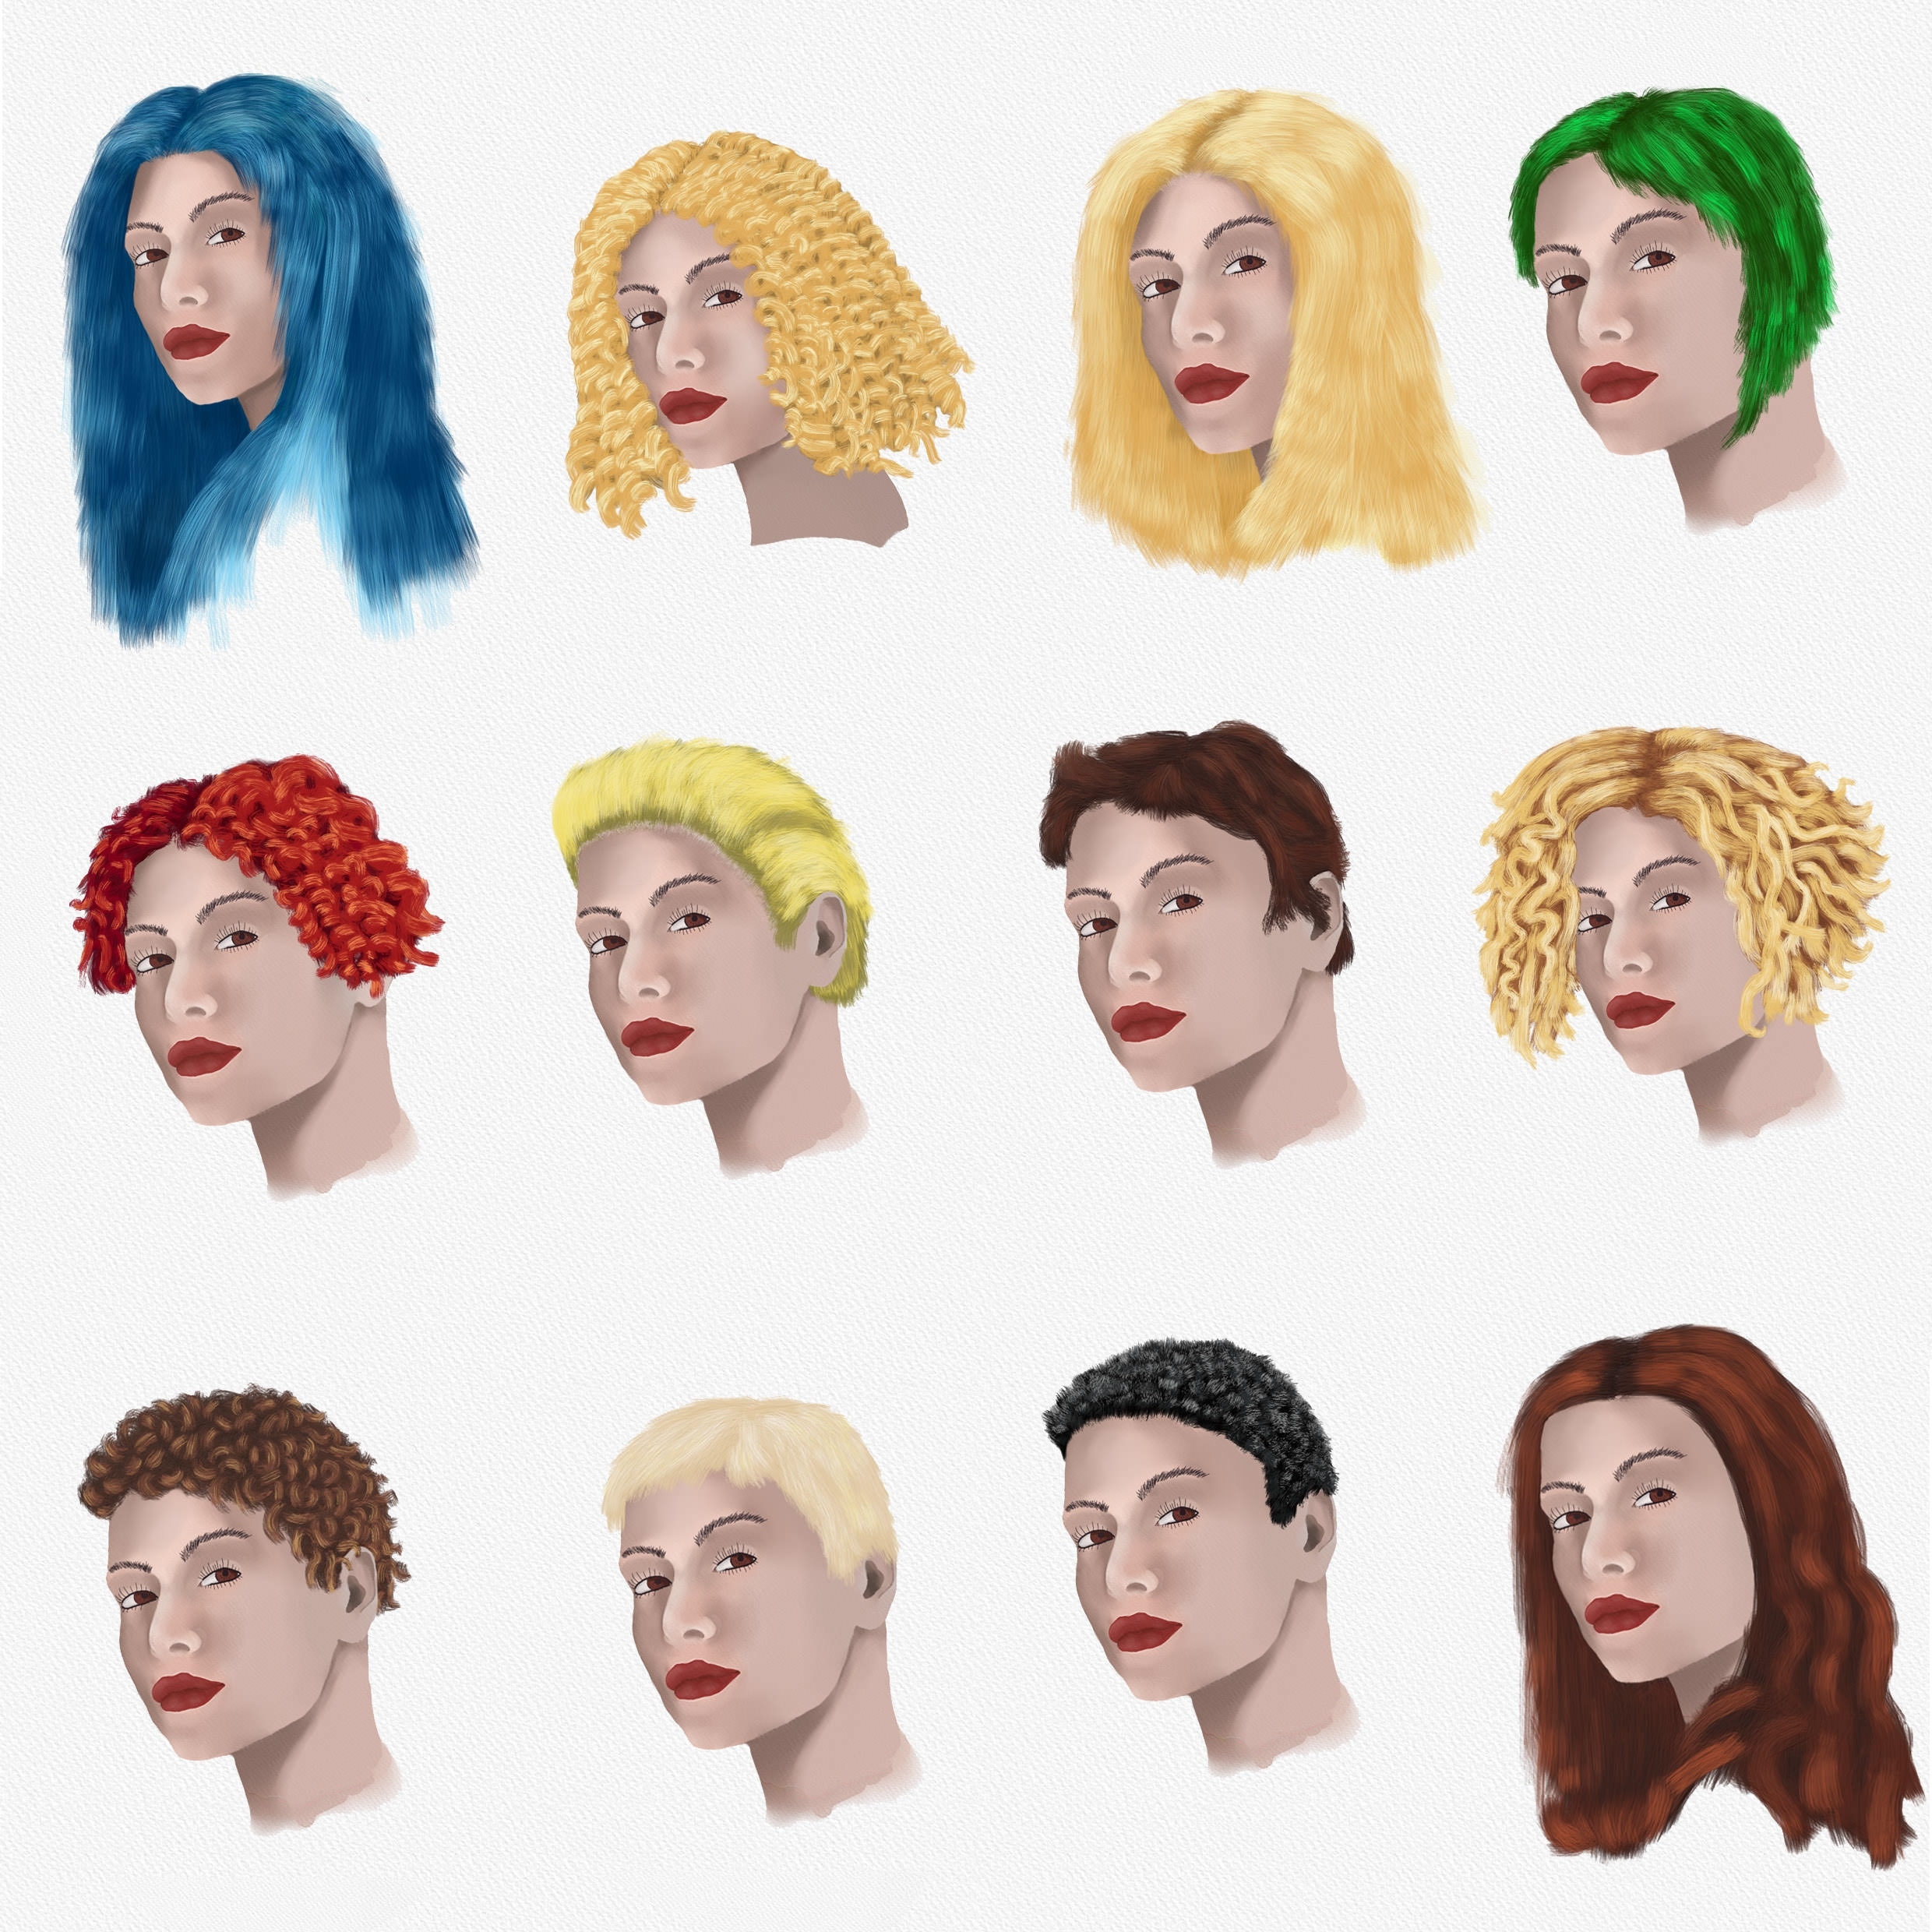 Random Hairstyle Drawing Which One Do You Prefer? - Album throughout Pick A Random Hairstyle